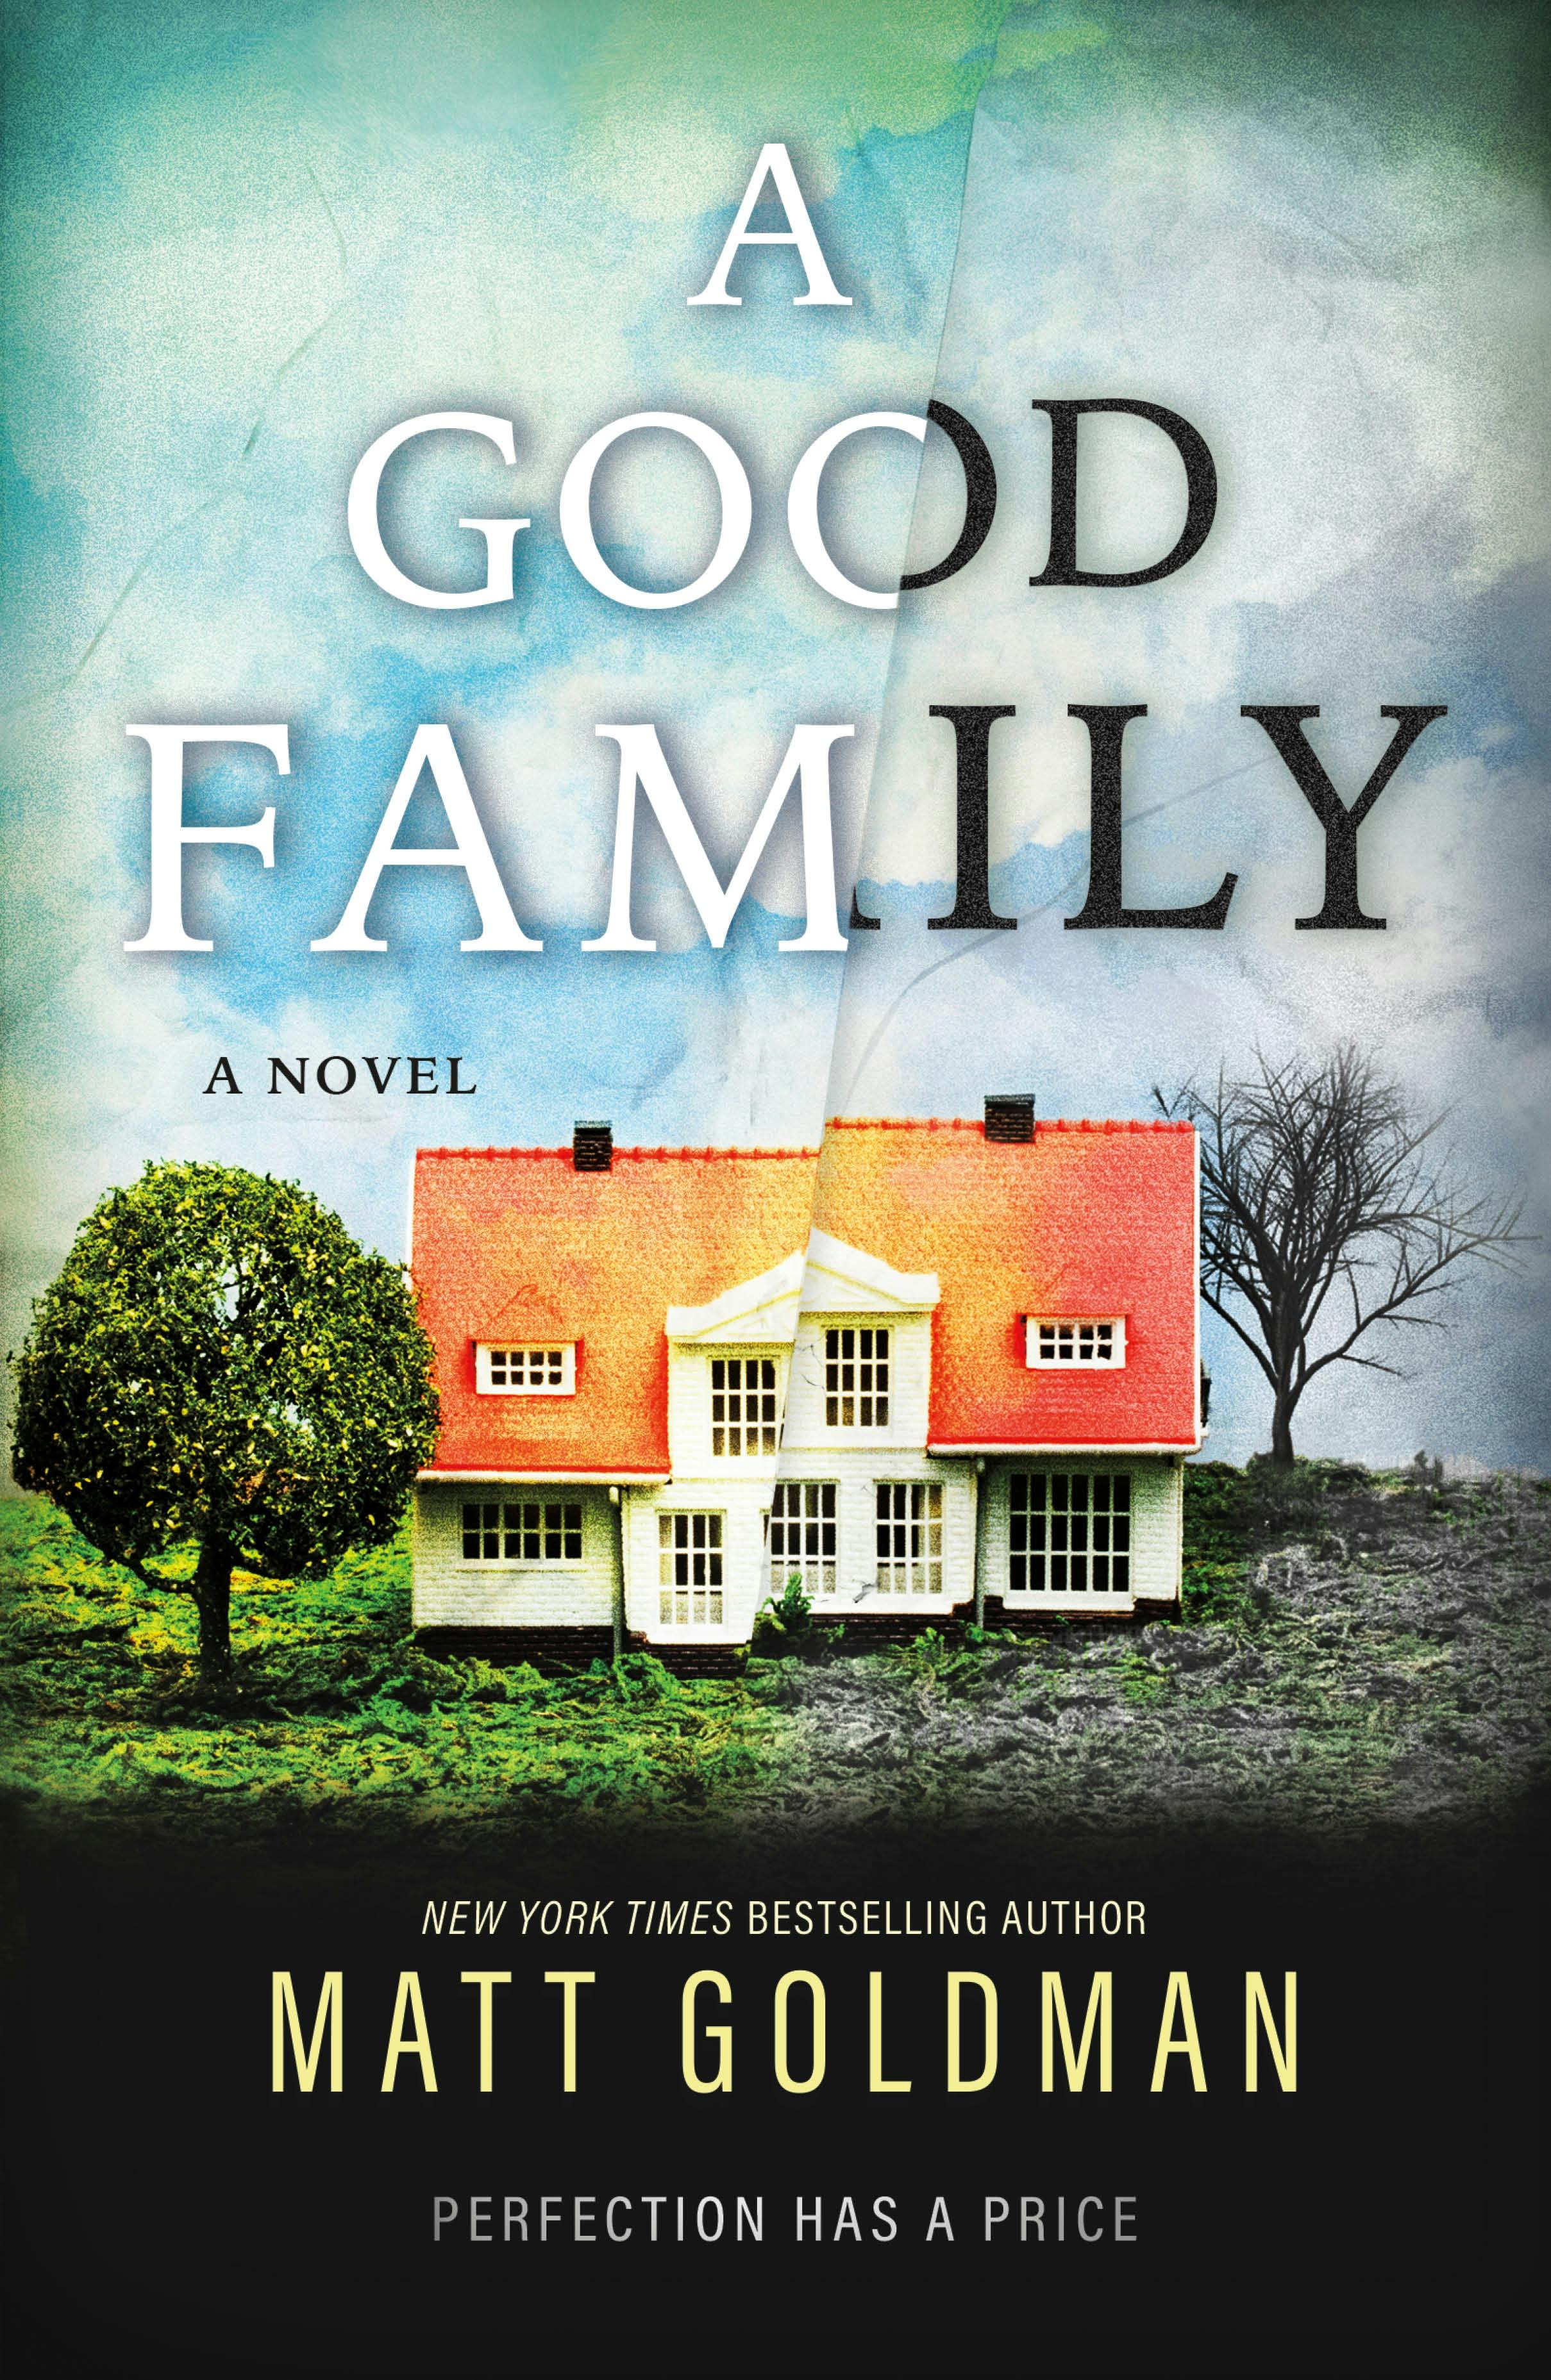 Cover for the book titled as: A Good Family